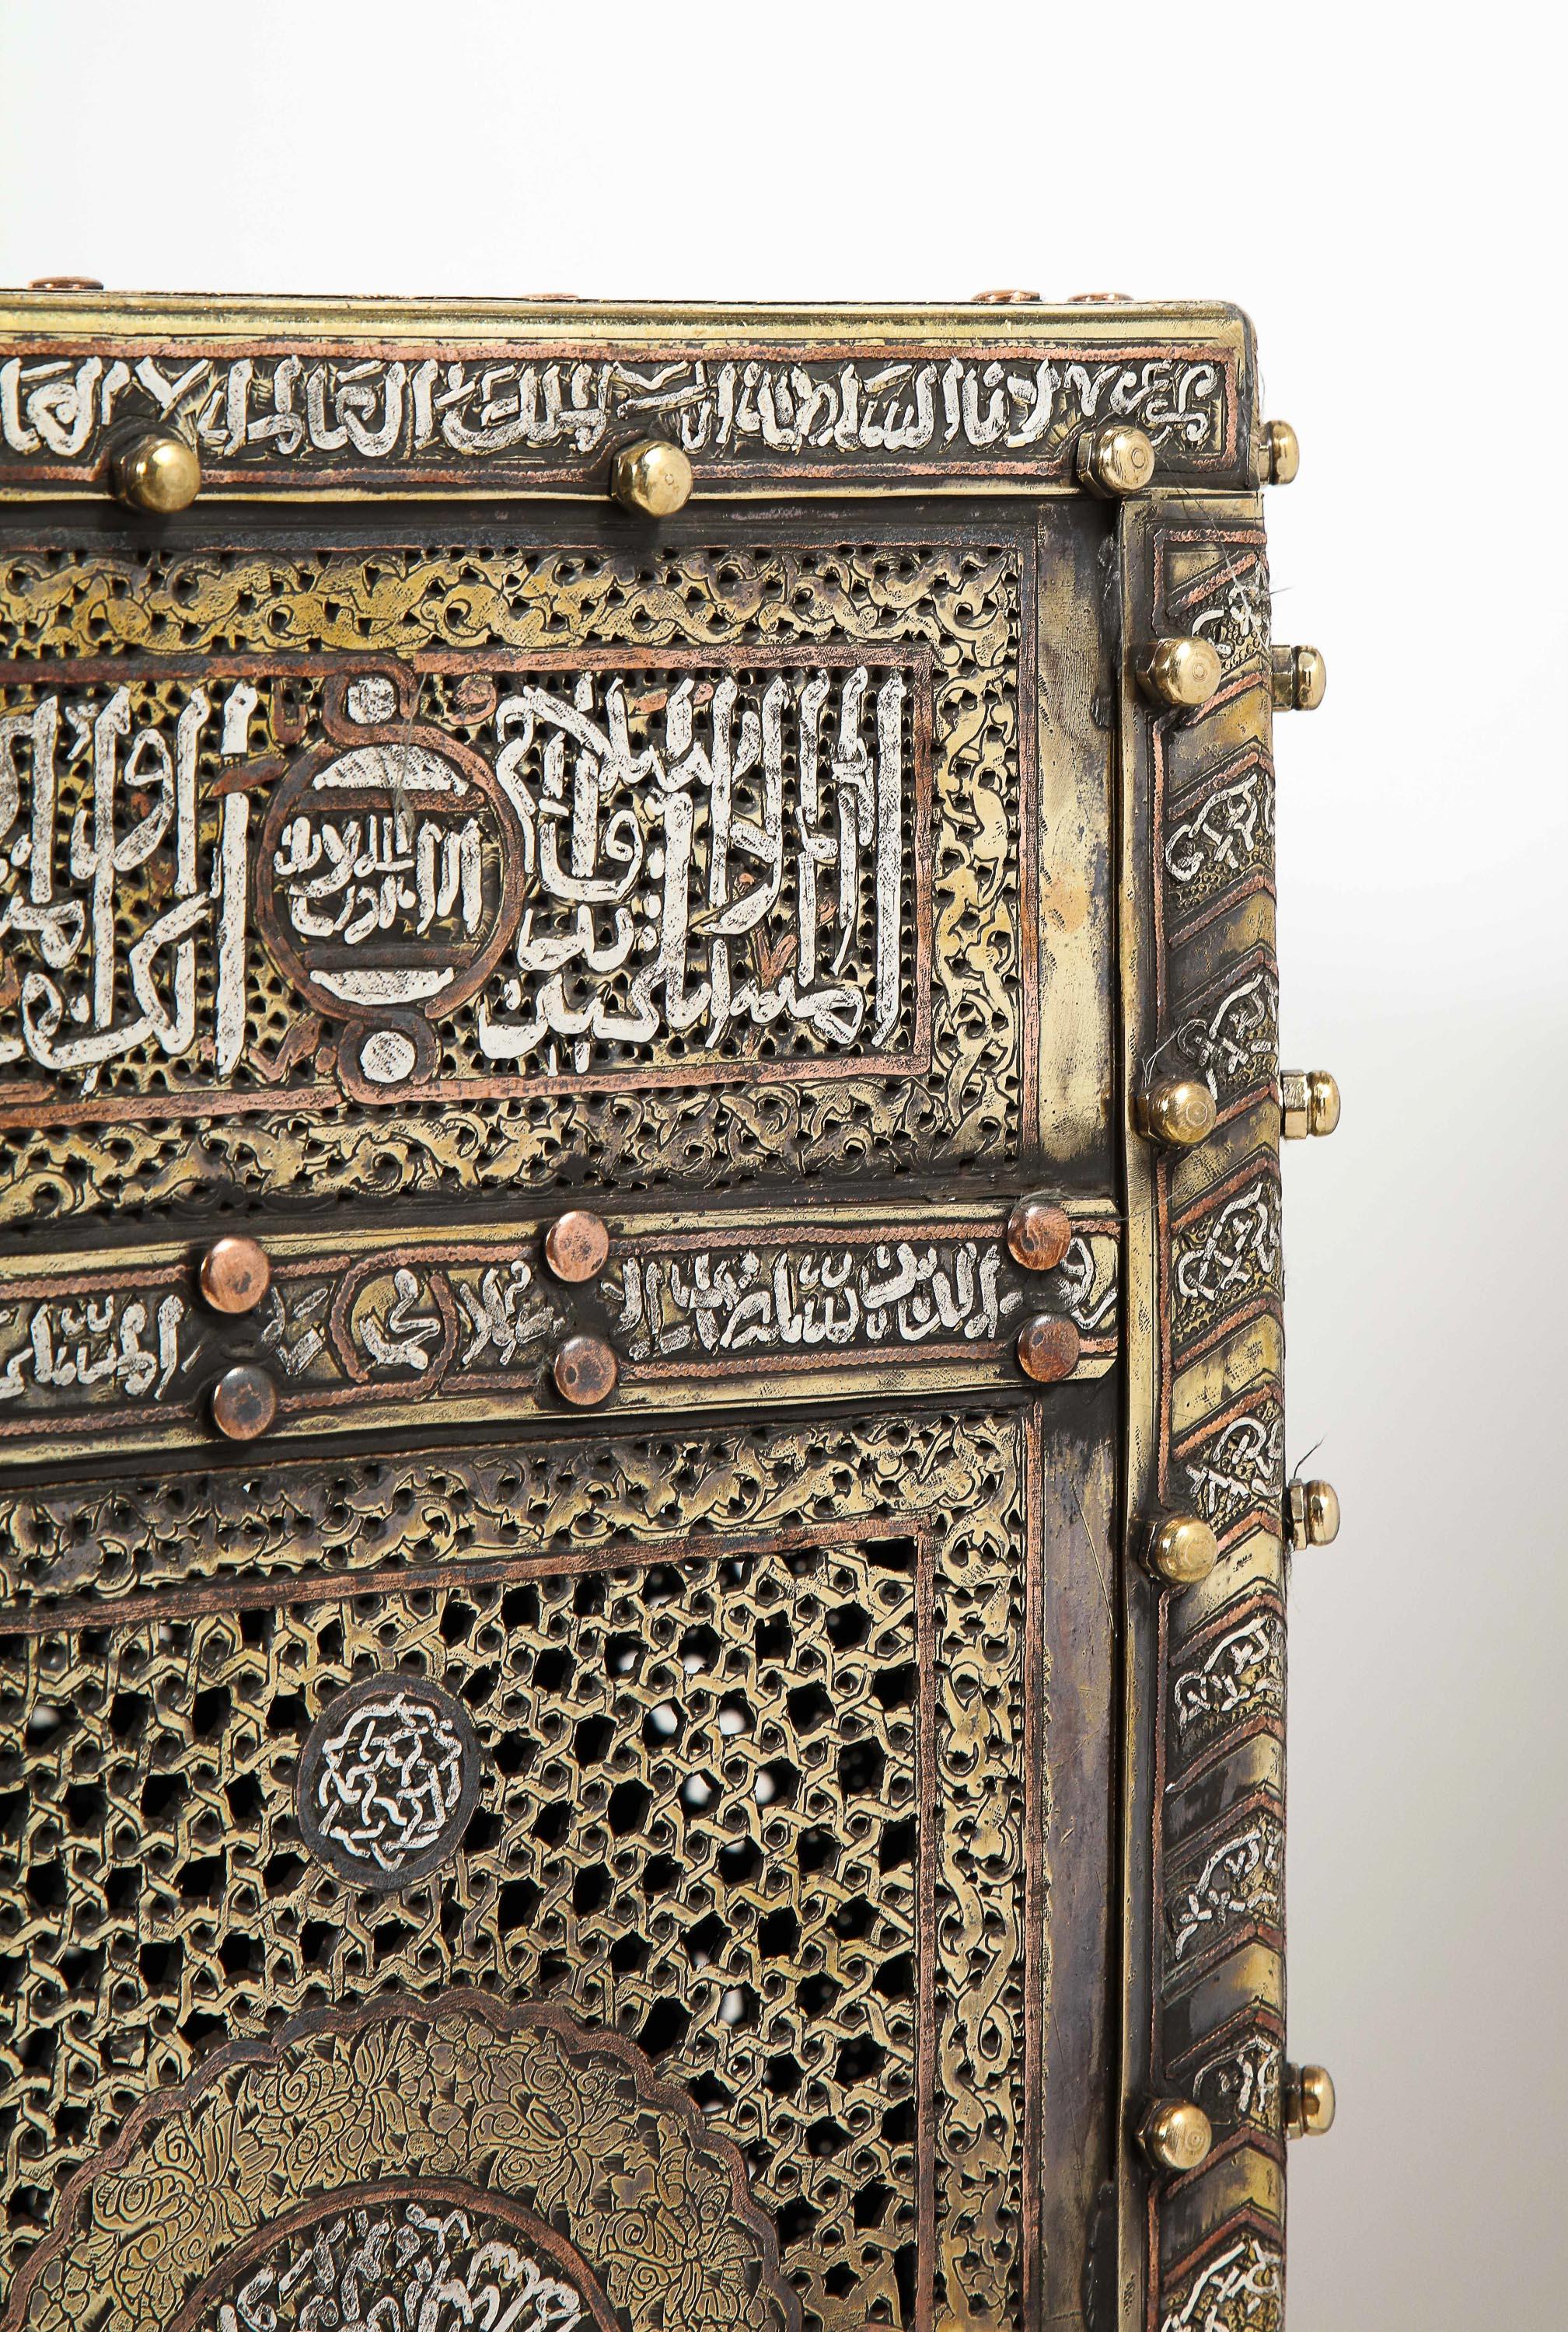 Exceptional Pair of Islamic Mamluk Revival Silver Inlaid Quran Side Tables For Sale 12